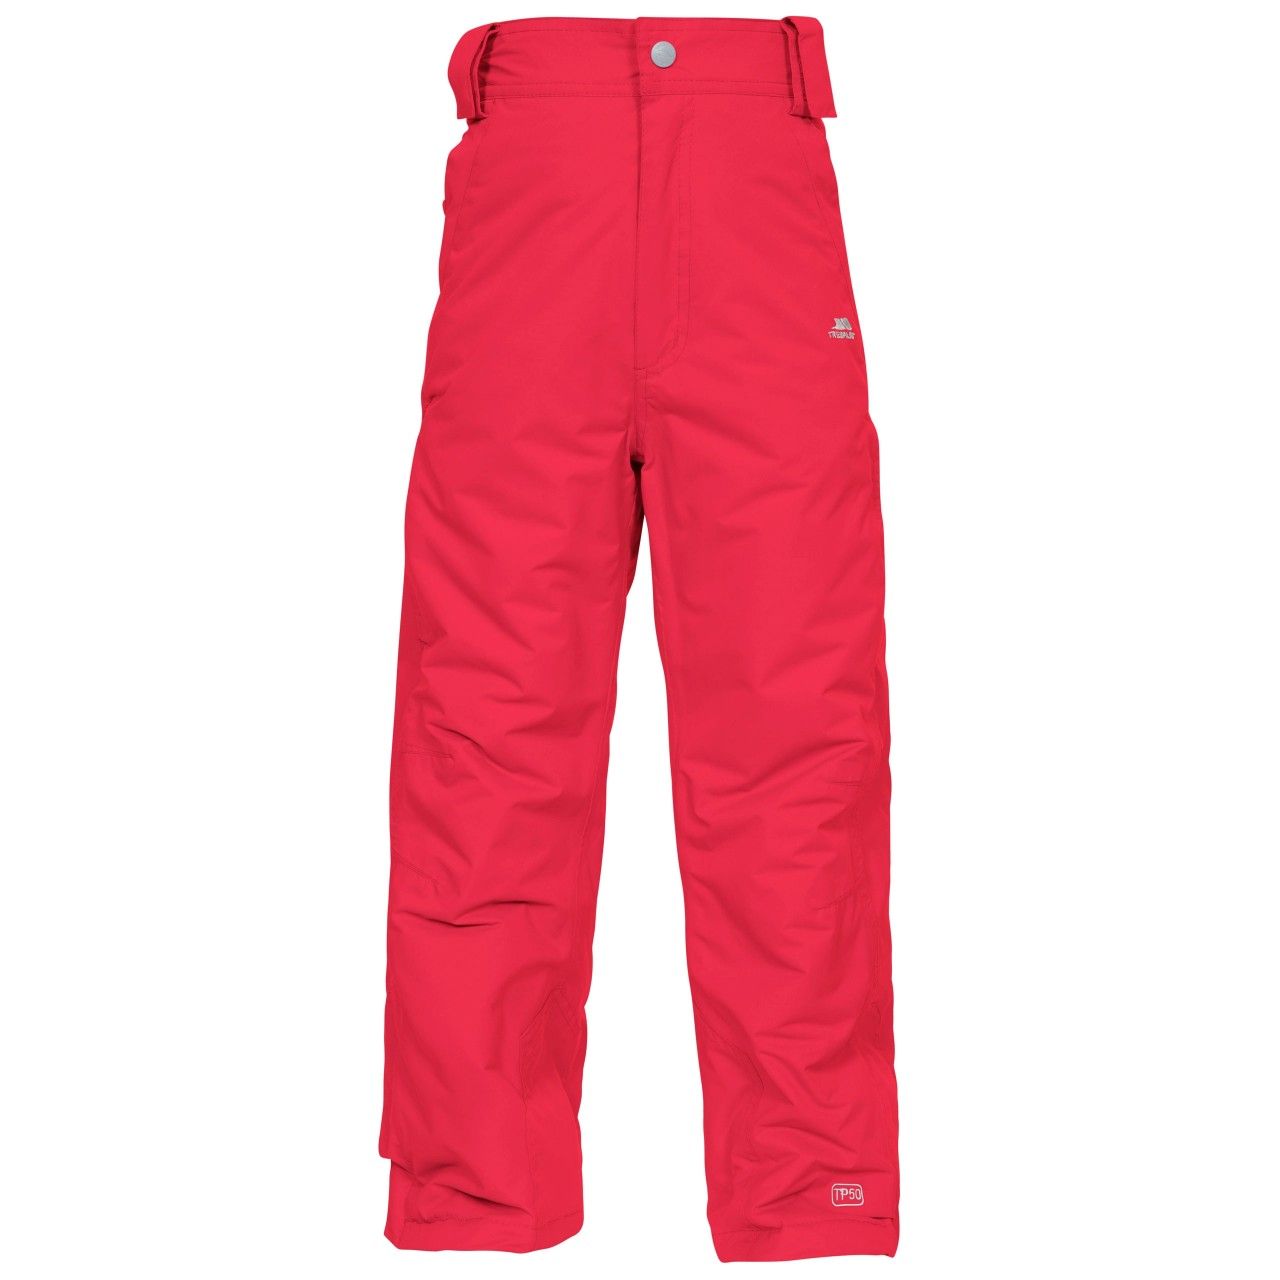 Allowing them to develop their skills, the Bombinate kids ski pants are a must-have piece of ski-wear for the budding skier. Utilising its padded design, ColdHeat fibres work hard to absorb their body heat and uses it to keep them warm whilst retaining a lightweight feel. The elasticated waist combined with detachable braces helps to create a fit that encourages movement while still feeling securely fitted. The windproof fabric provides a much needed defence when it comes to tackling cold winds and a 2,000mm waterproof finish with taped seams will lock out moisture at the surface, to help the interior stay free from dampness. Fitted with ankle gaiters, they´ll be able to make their way across the snow without worrying about build-up in the hem. Material: Shell: 100% Polyester, Lining: 100% Polyester, Filling: 100% Polyester. Trespass Childrens Waist Sizing (approx): 2/3 Years - 20in/50.5cm, 3/4 Years - 21in/53cm, 5/6 Years - 22in/56cm, 7/8 Years - 23in/58.5cm, 9/10 Years - 24in/61cm, 11/12 Years - 26in/66cm.